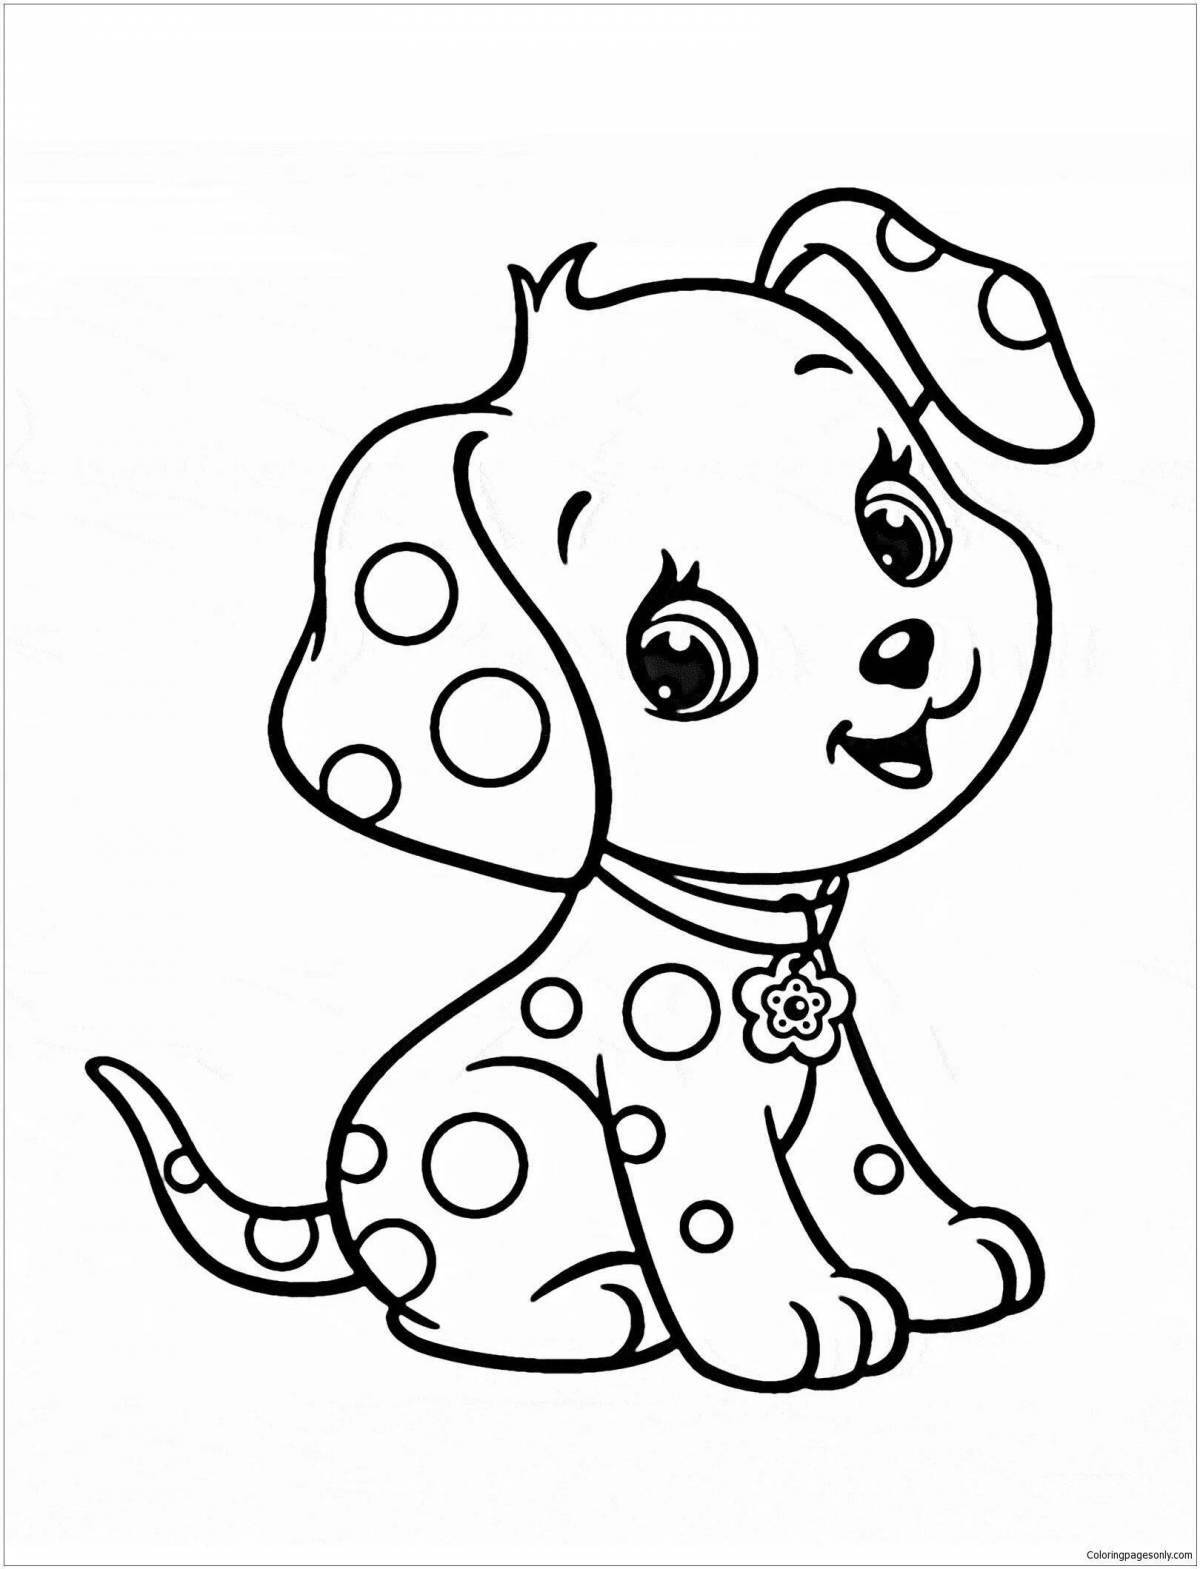 Impressive coloring book for children 6-7 years old for girls animals